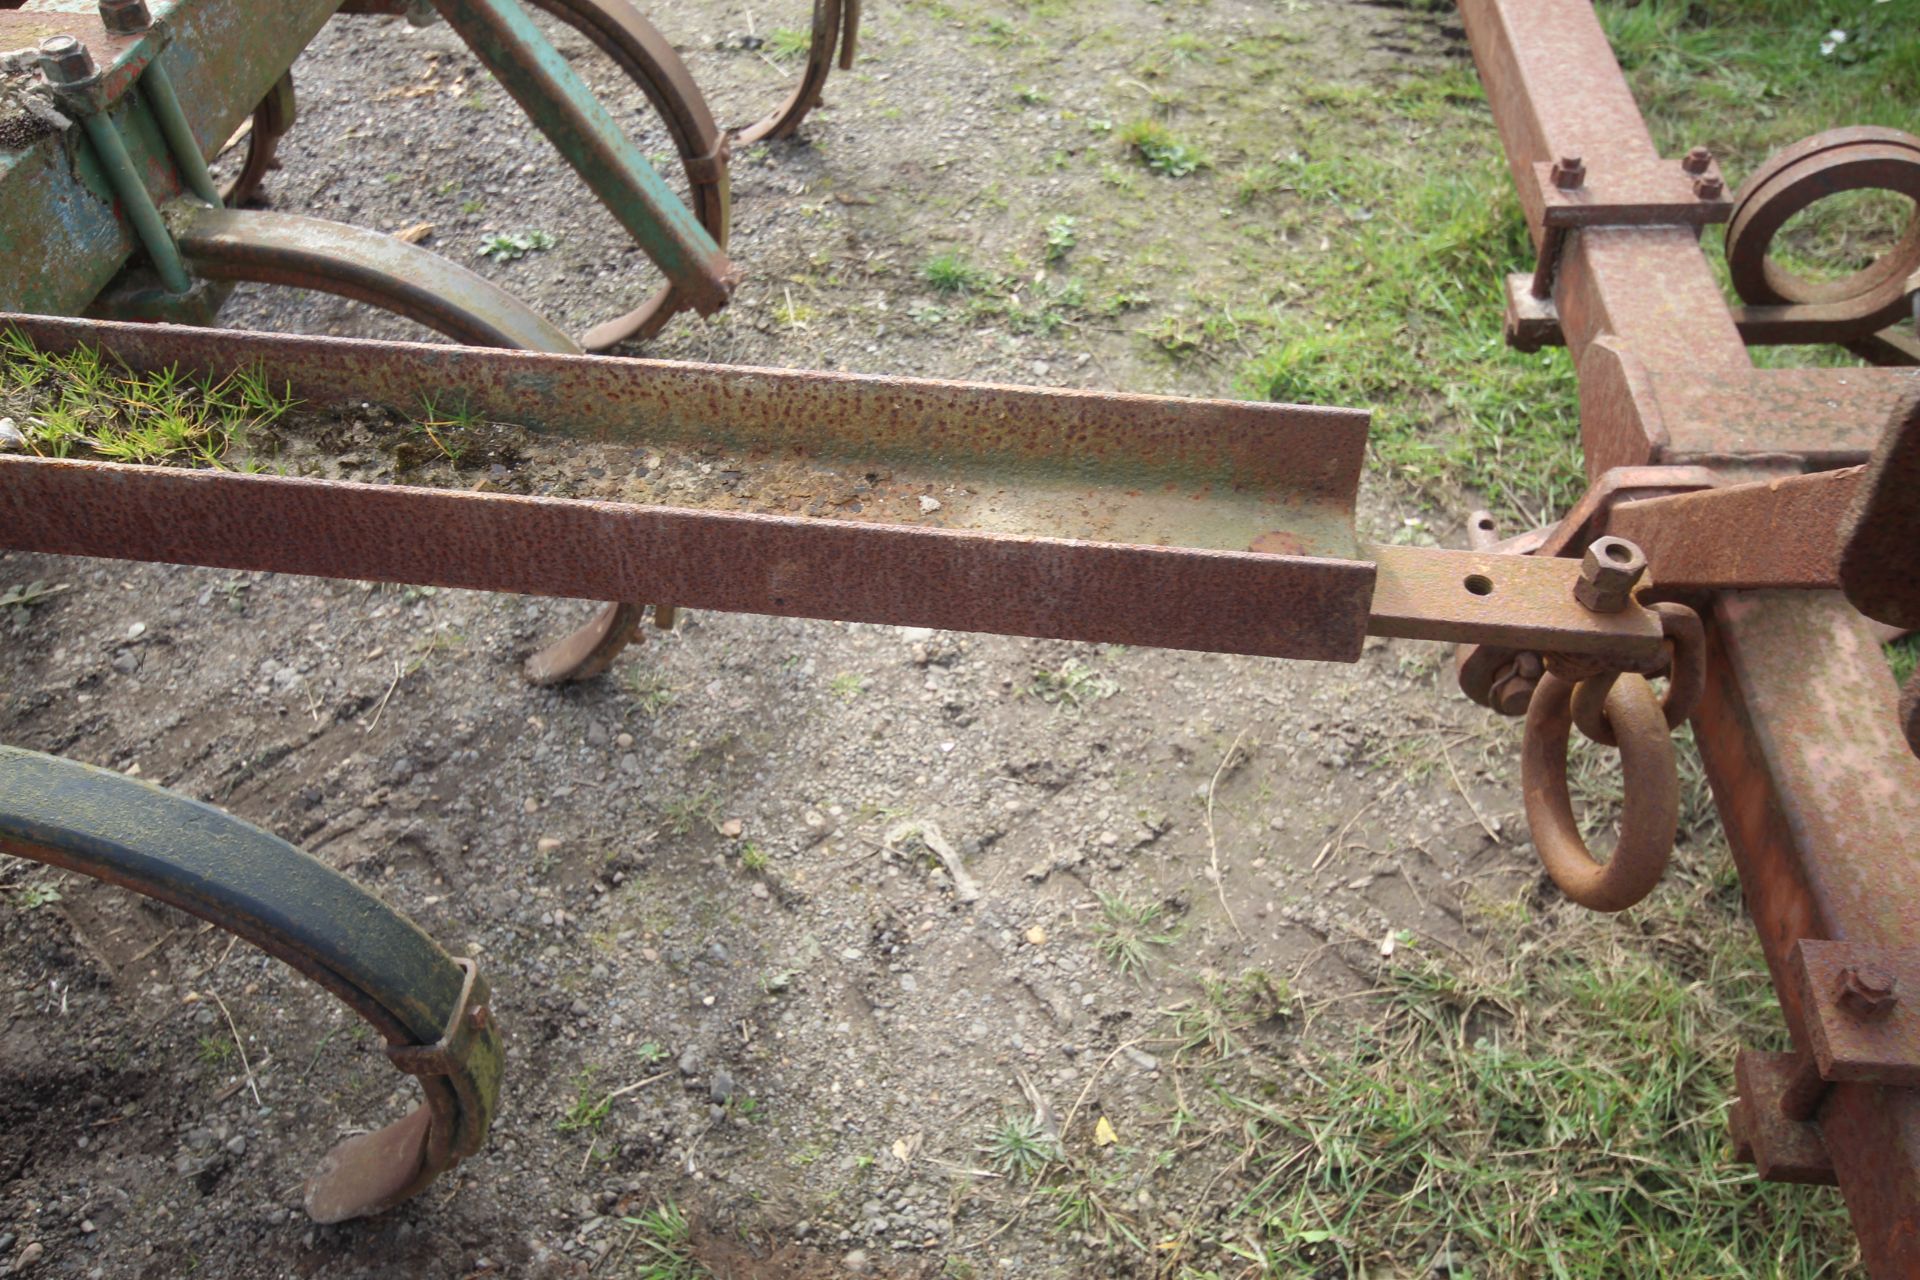 4m sprung tine cultivator. - Image 11 of 15